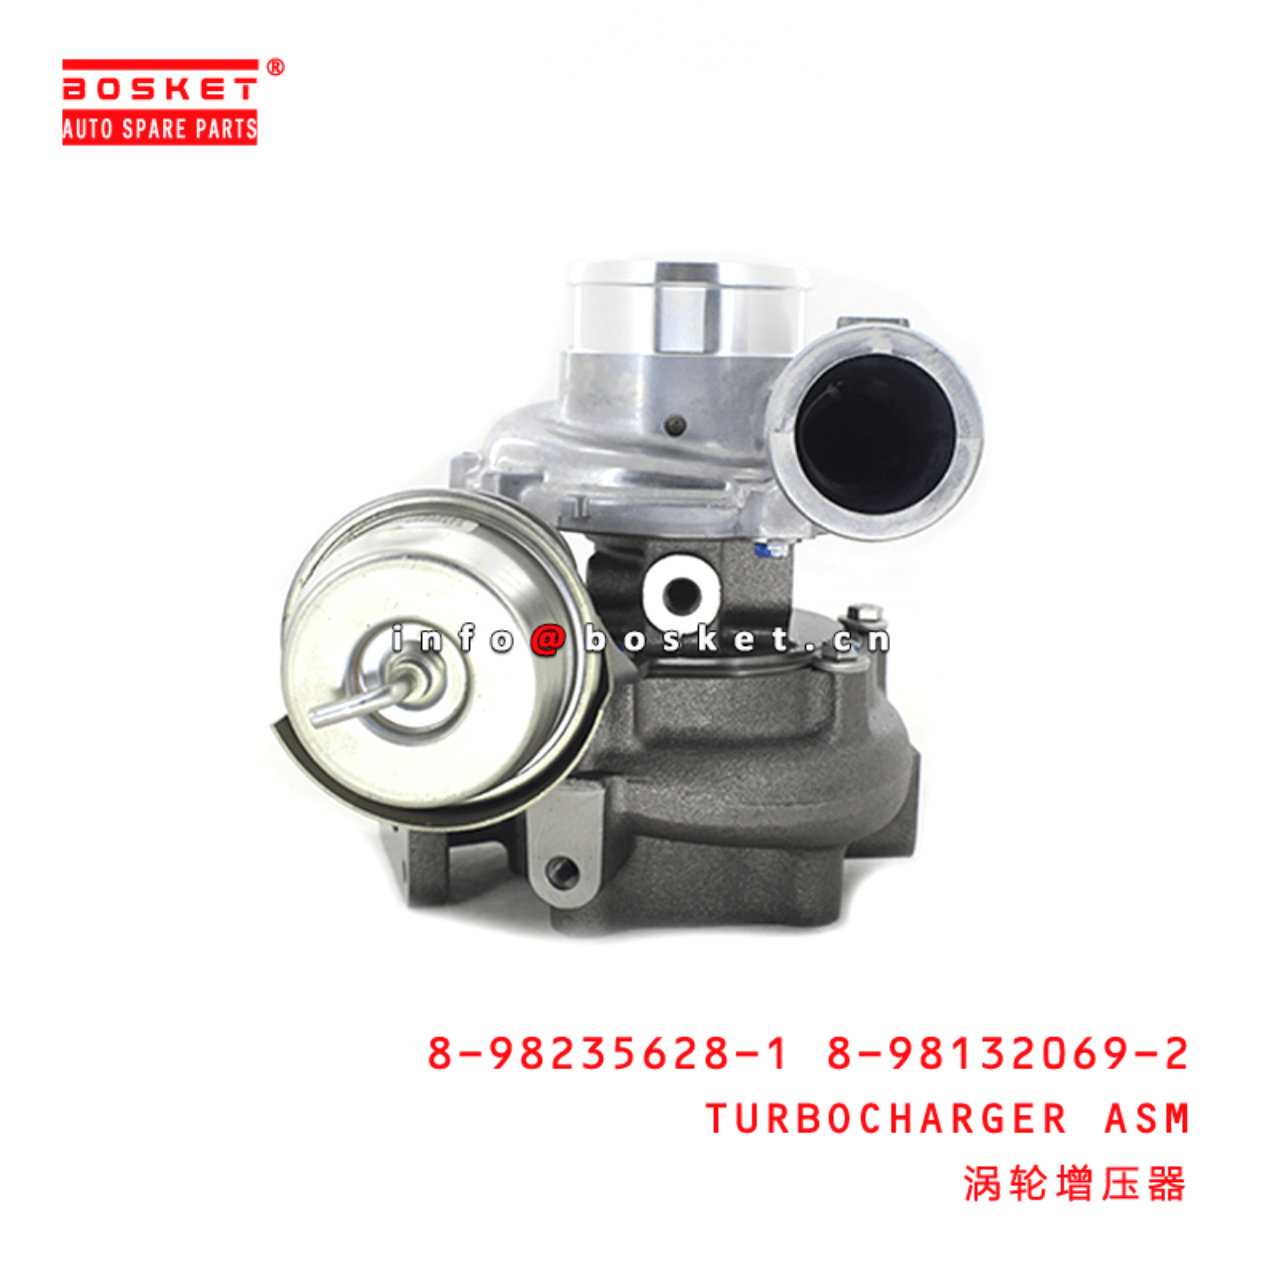 8-98235628-1 8-98132069-2 Turbocharger Assembly 8982356281 8981320692 Suitable for ISUZU D-MAX